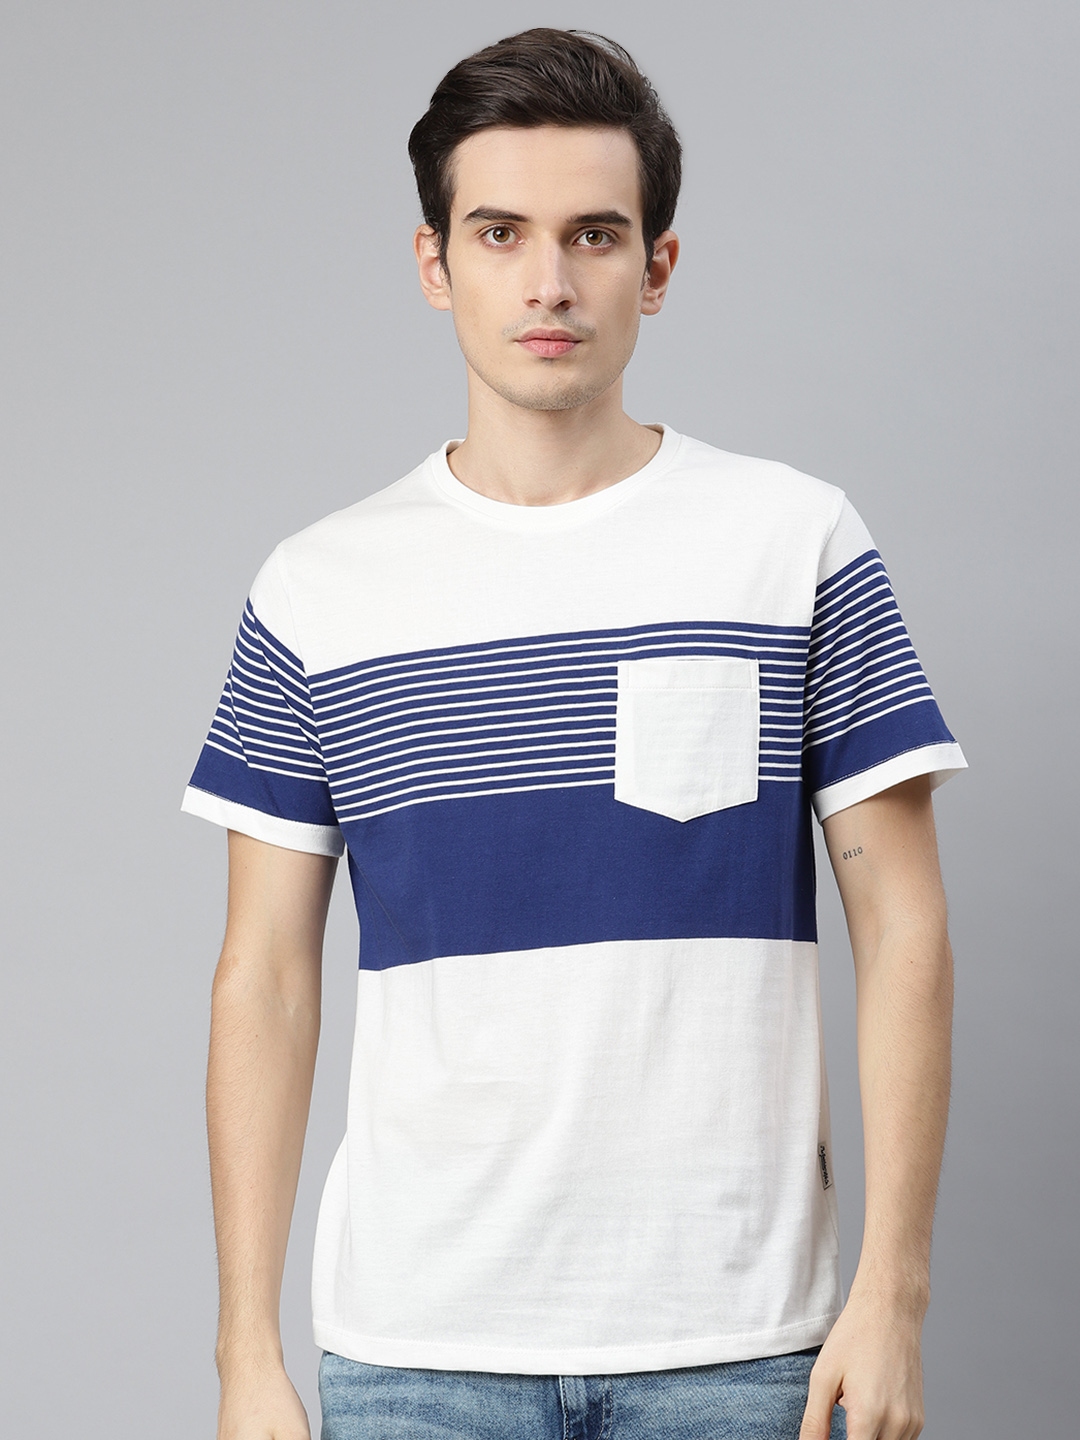 Buy The Roadster Lifestyle Co Men Blue White Pure Cotton Striped Round ...